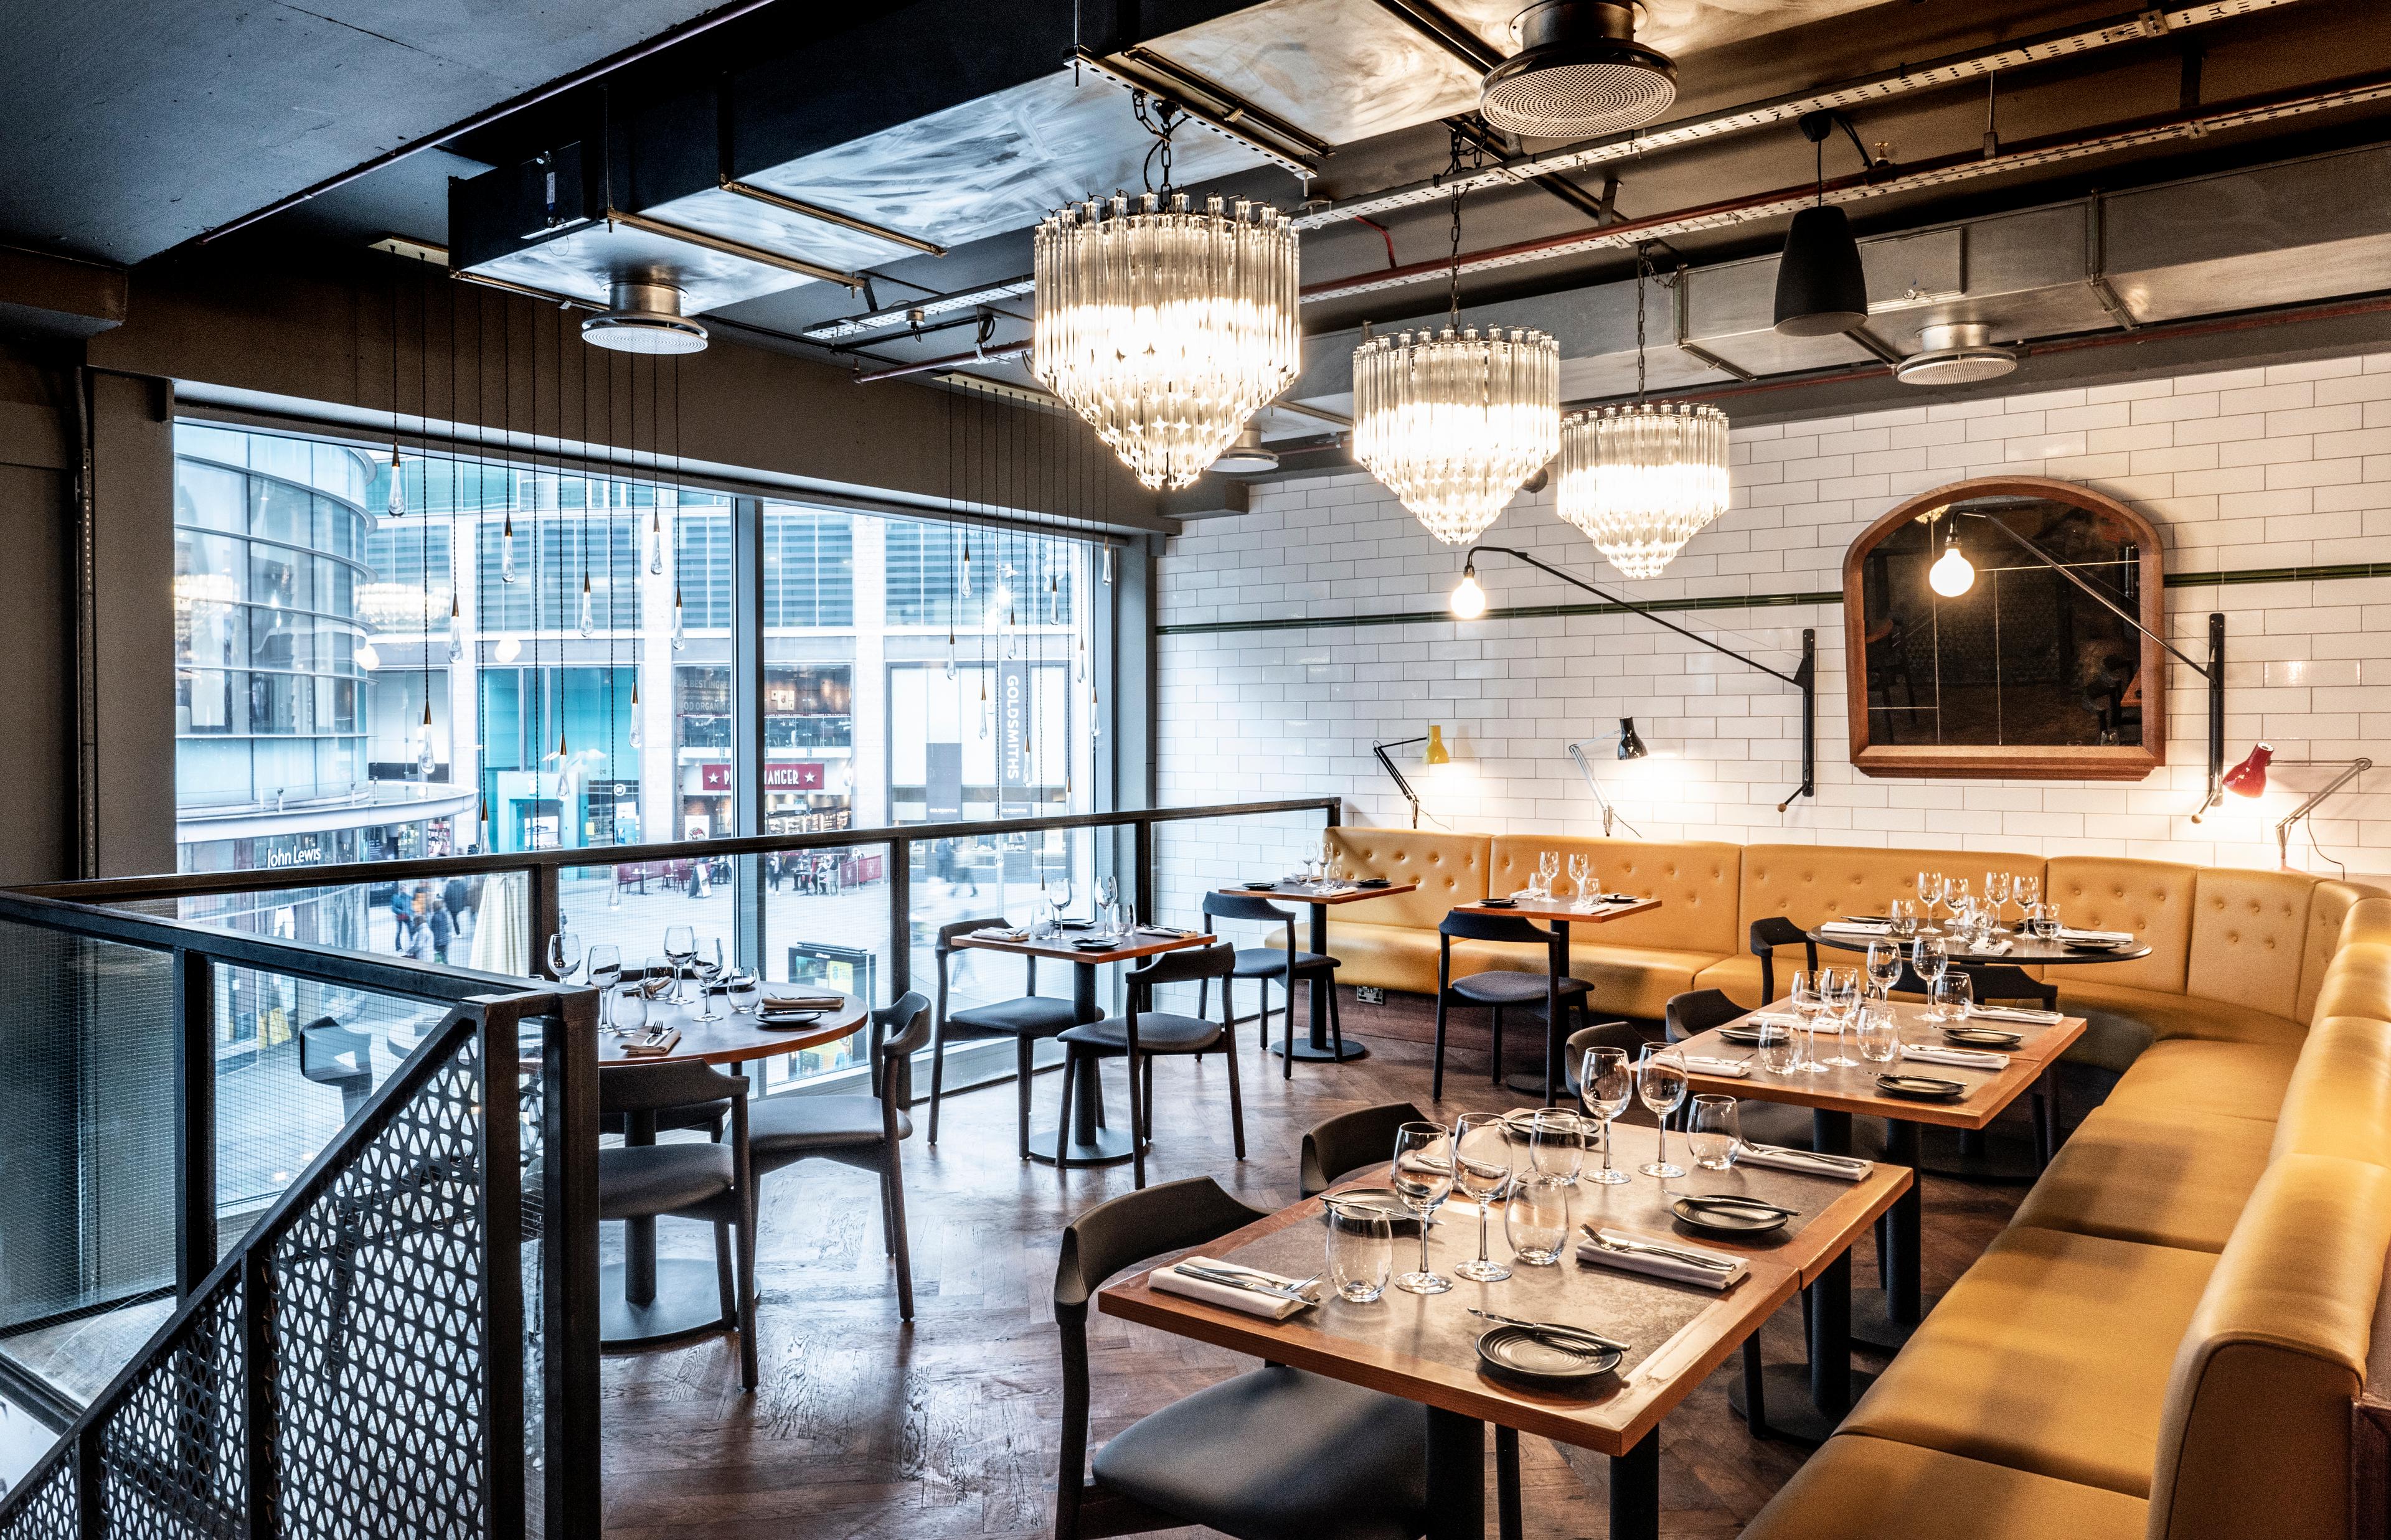 Exclusive Hire, Bread Street Kitchen & Bar, By Gordon Ramsay - Liverpool photo #2